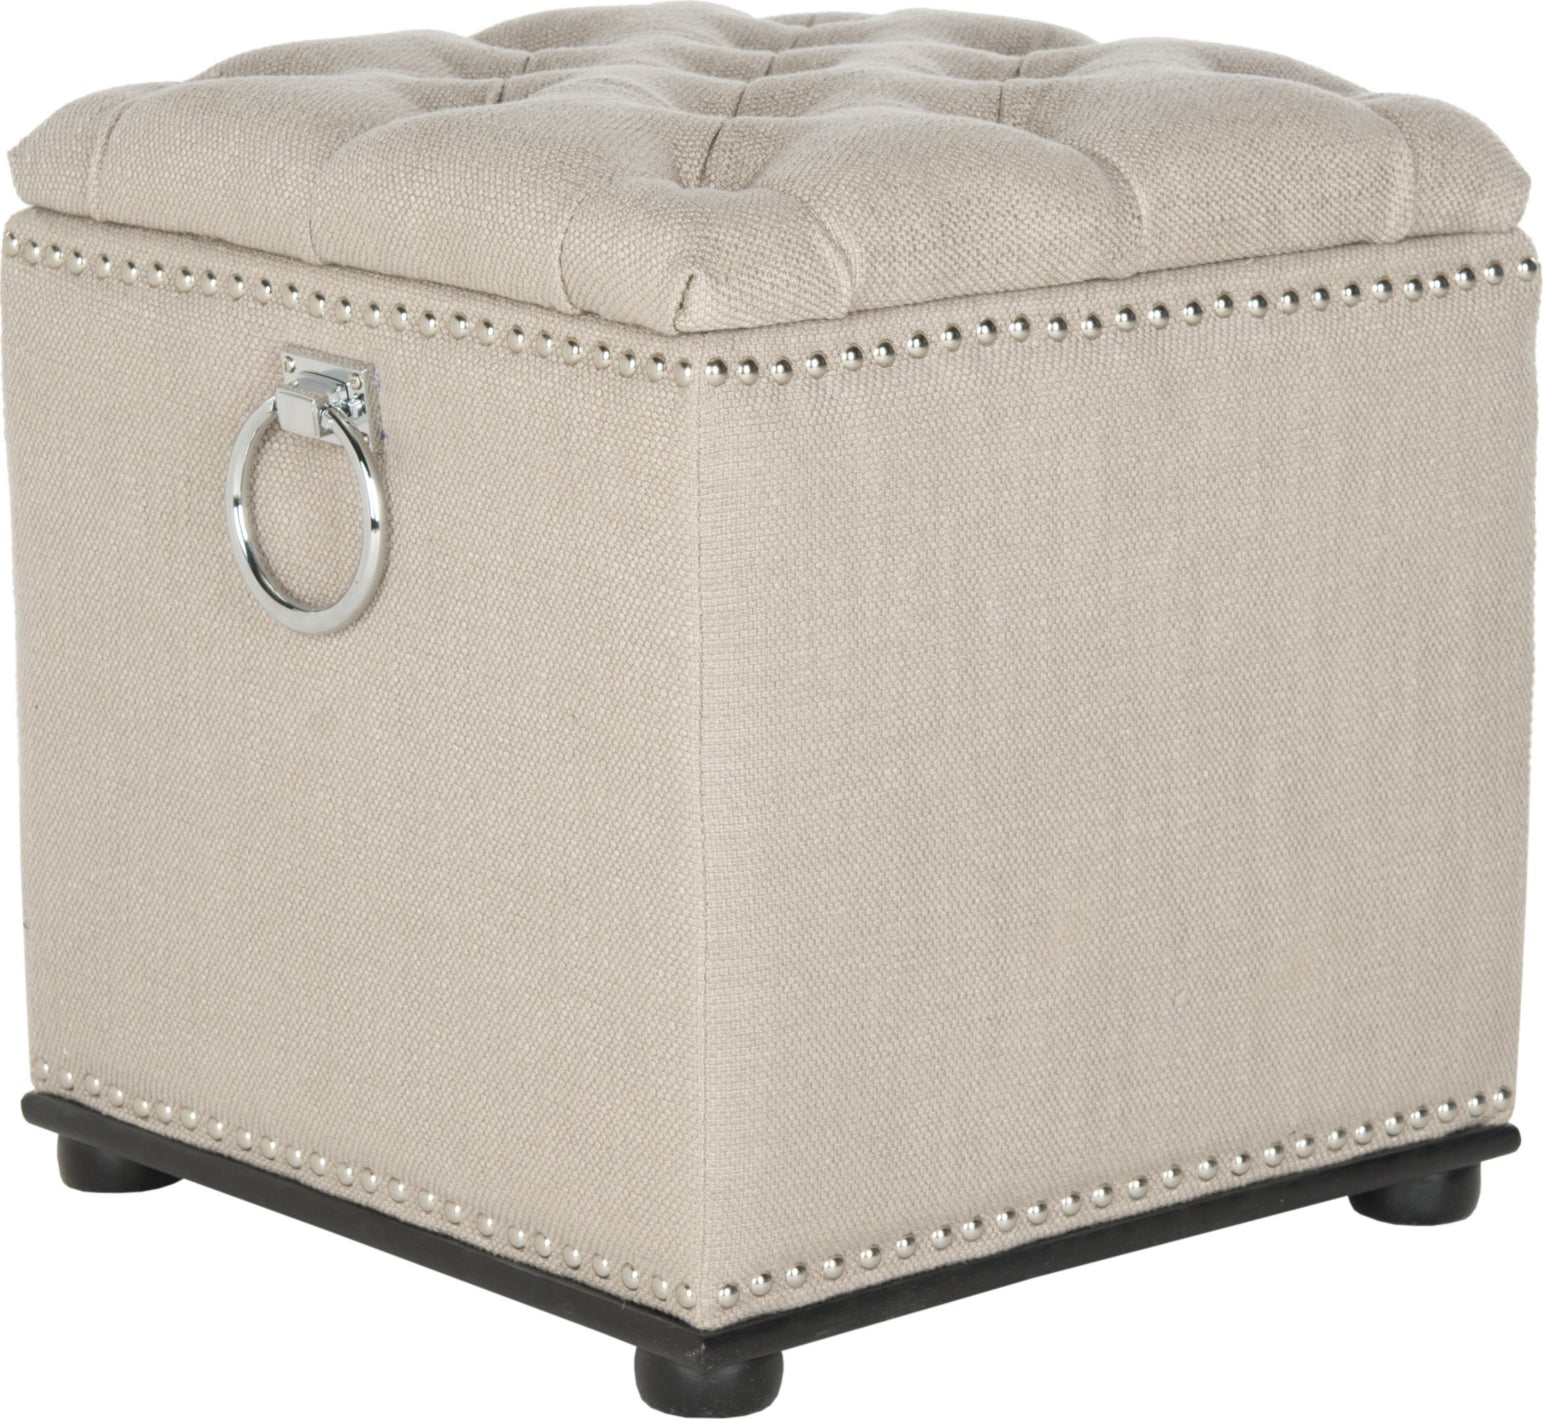 Safavieh Arturo Storage Ottoman-With Silver Nail Heads Biscuit Beige and Black Furniture main image